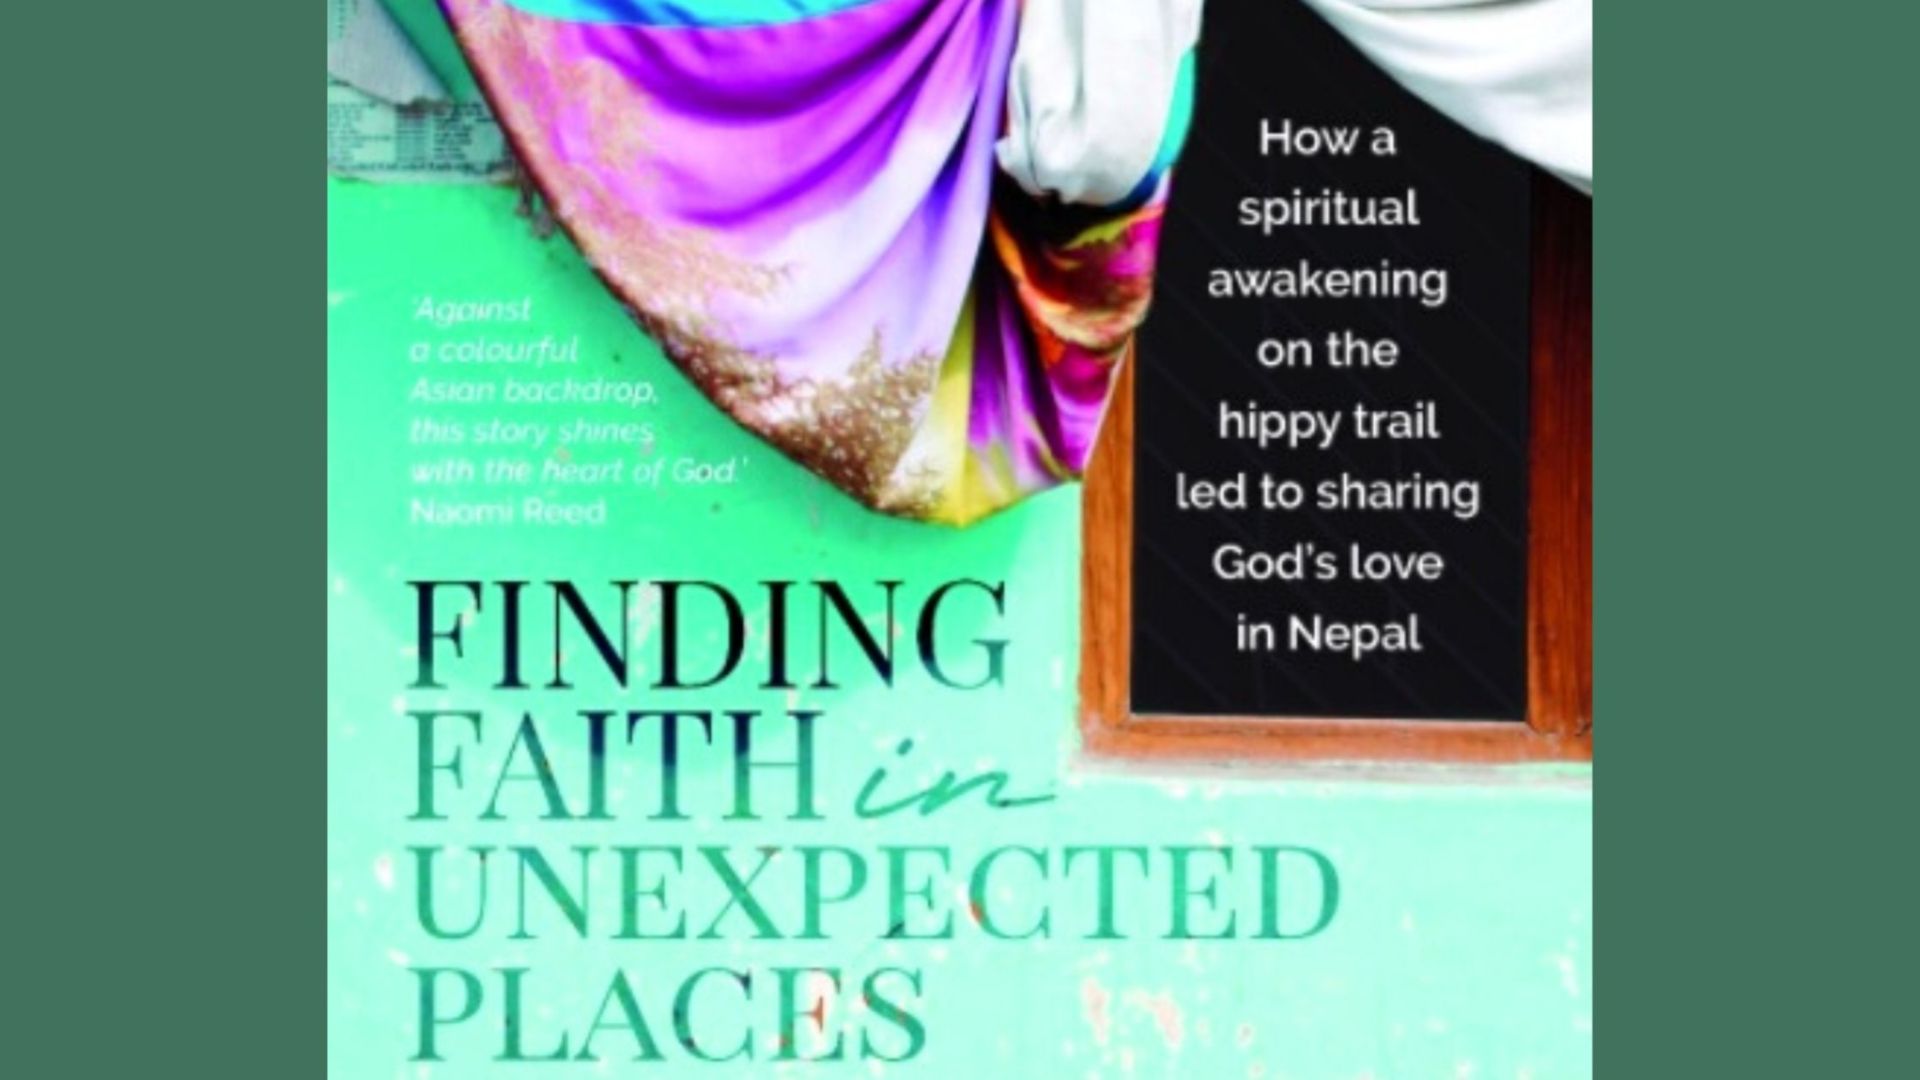 Interview with Geoff Walvin, author of Finding Faith in Unexpected Places